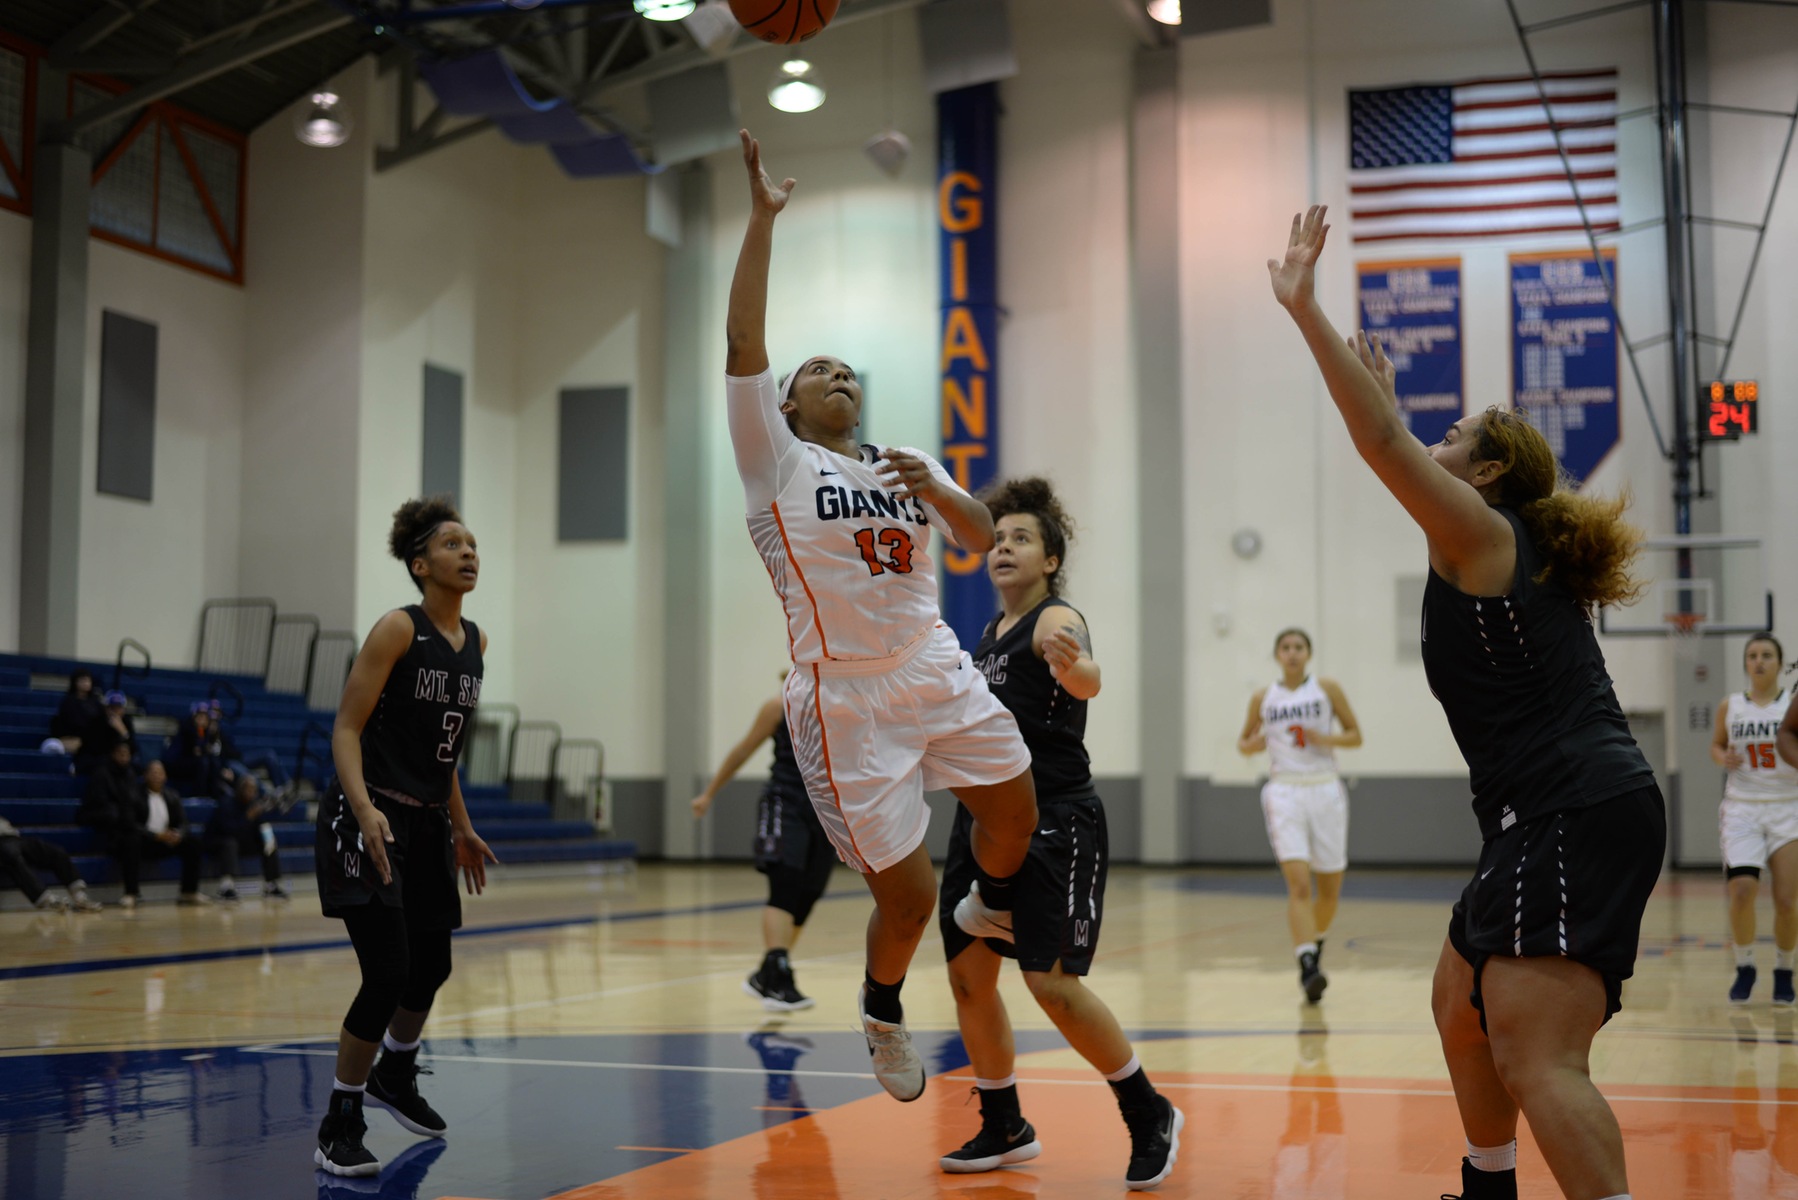 Giants get back on track with win over Lady Blue Devils